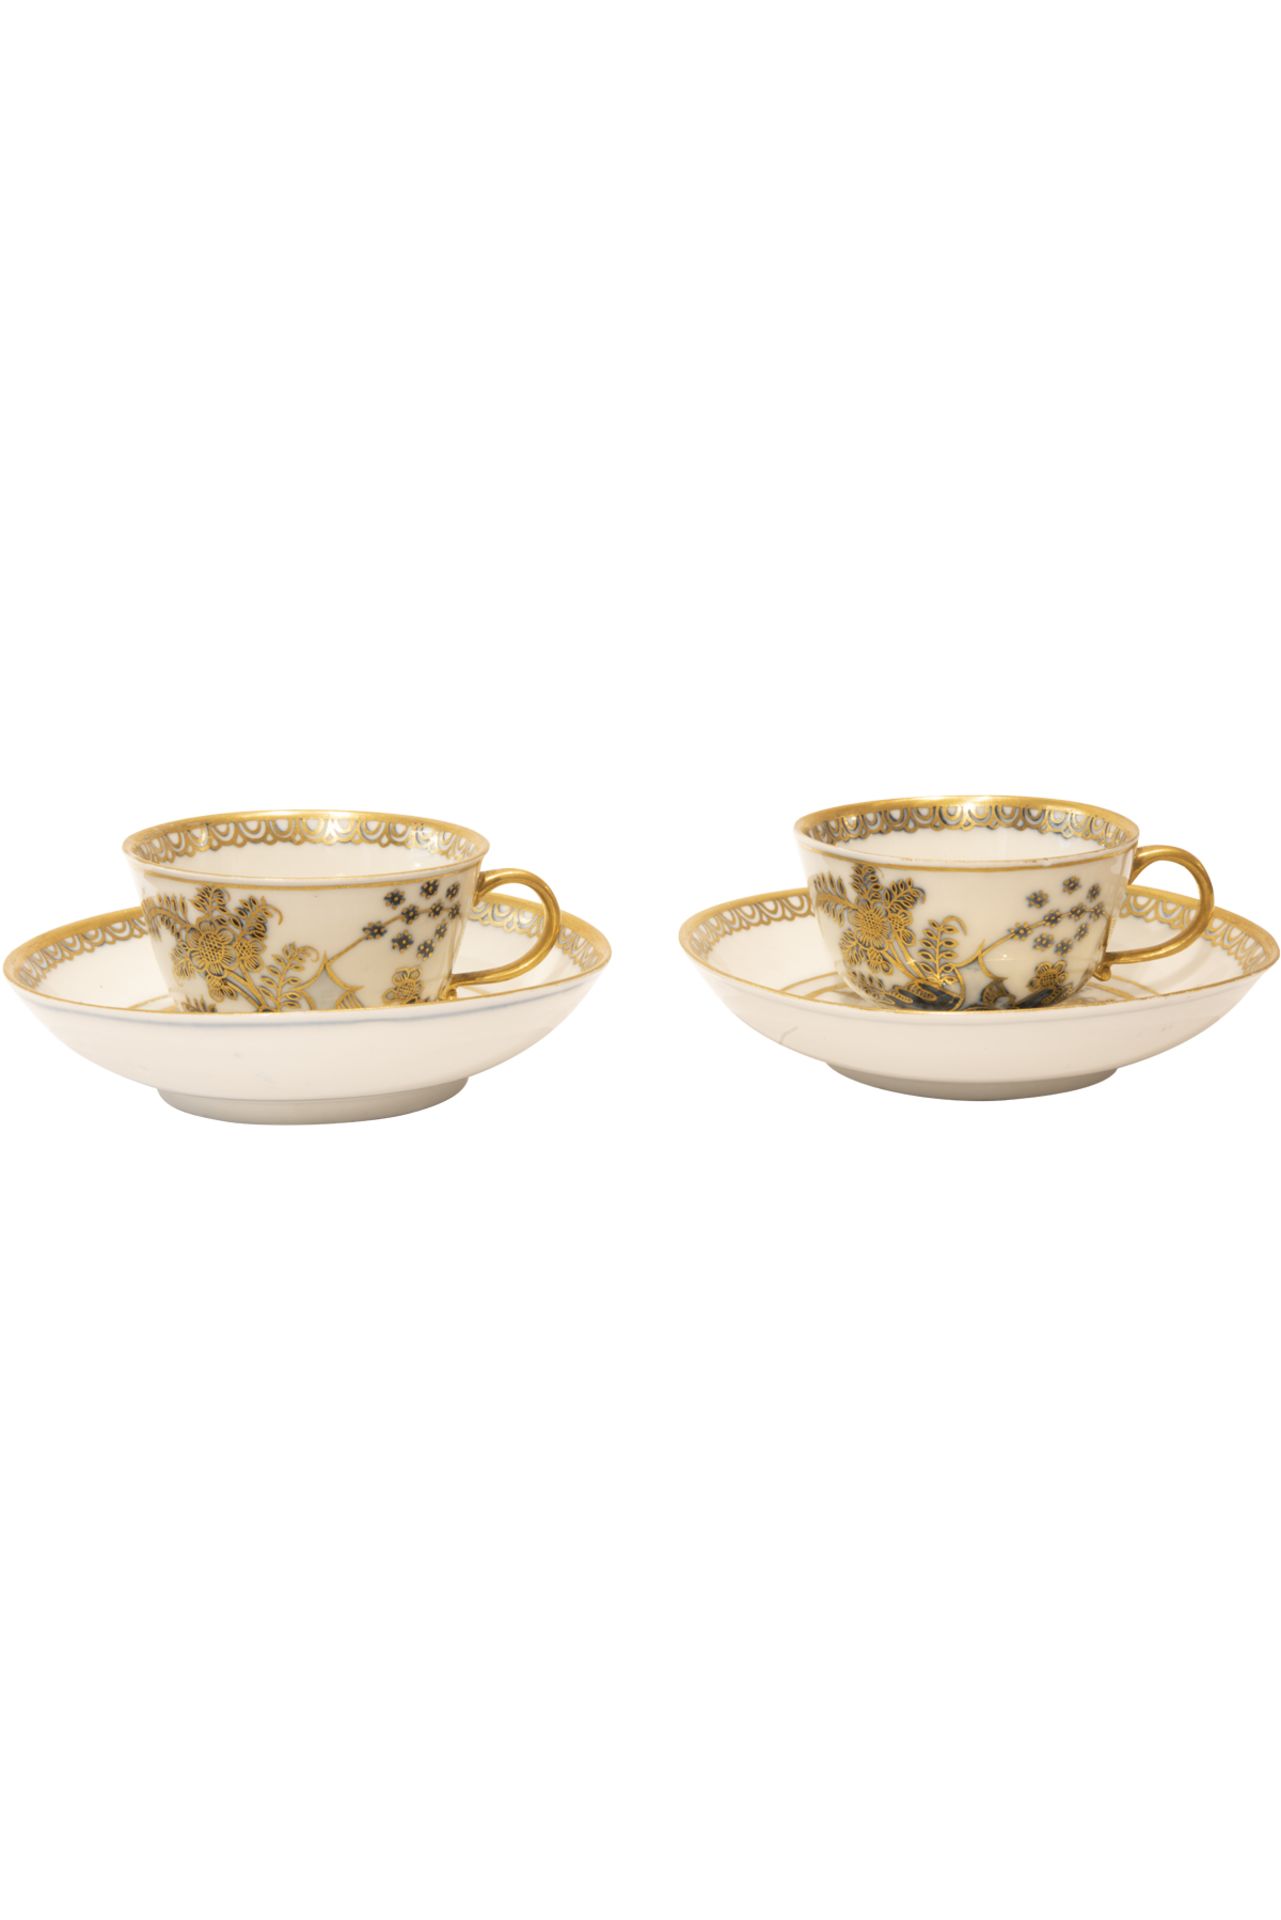 Two Cups with saucers, Meissen around 1740